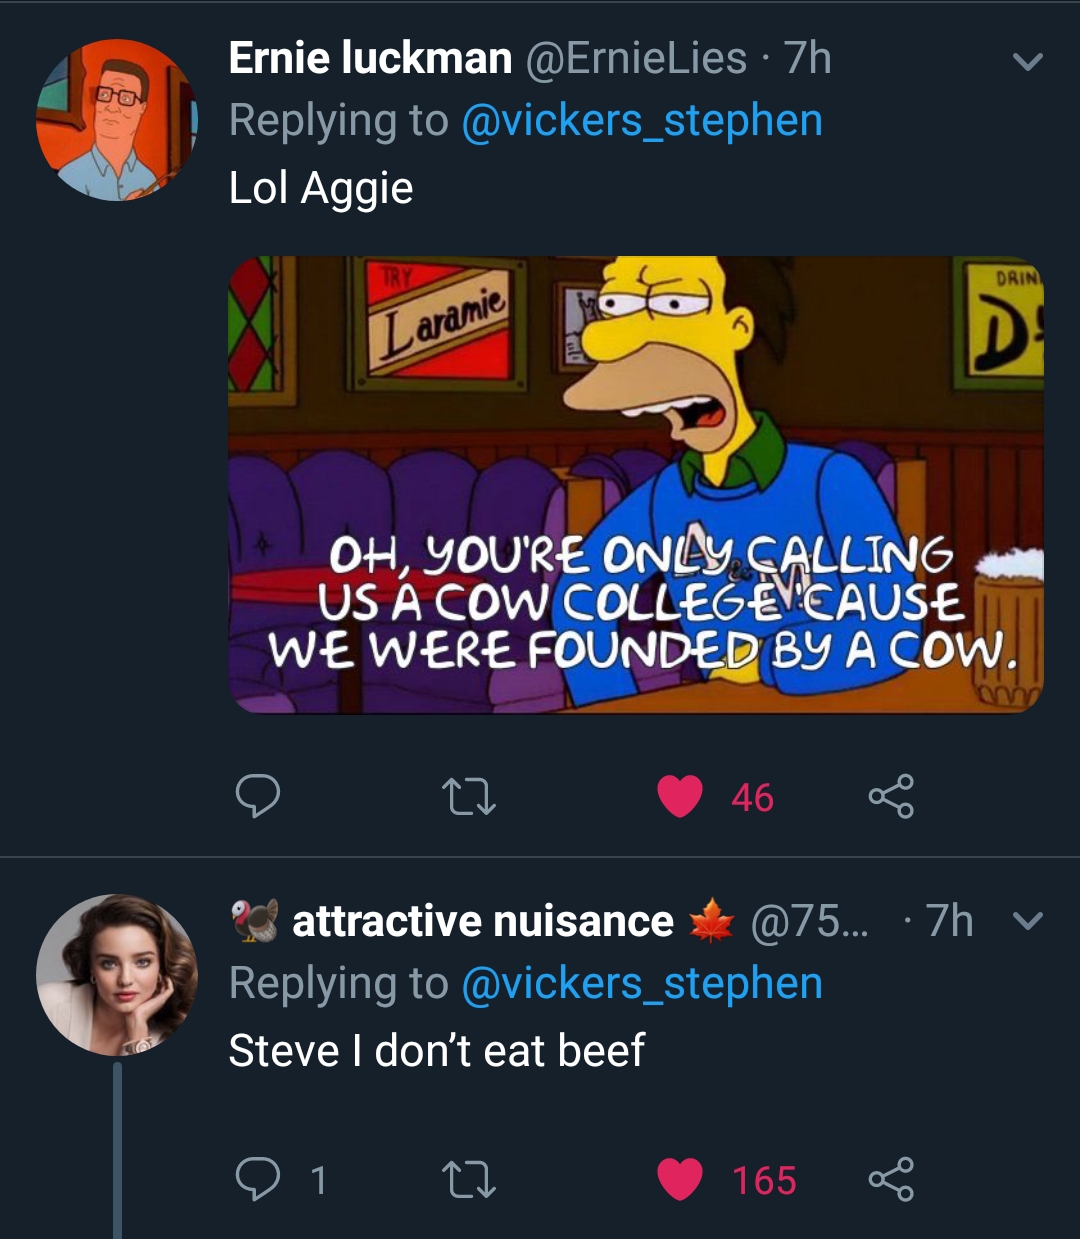 rant - screenshot - Ernie luckman .7h Lol Aggie Laramie D Oh, You'Re Only Calling Us A Cow College Cause We Were Founded By A Cow. v attractive nuisance ... .7h Steve I don't eat beef 0 1 2 165